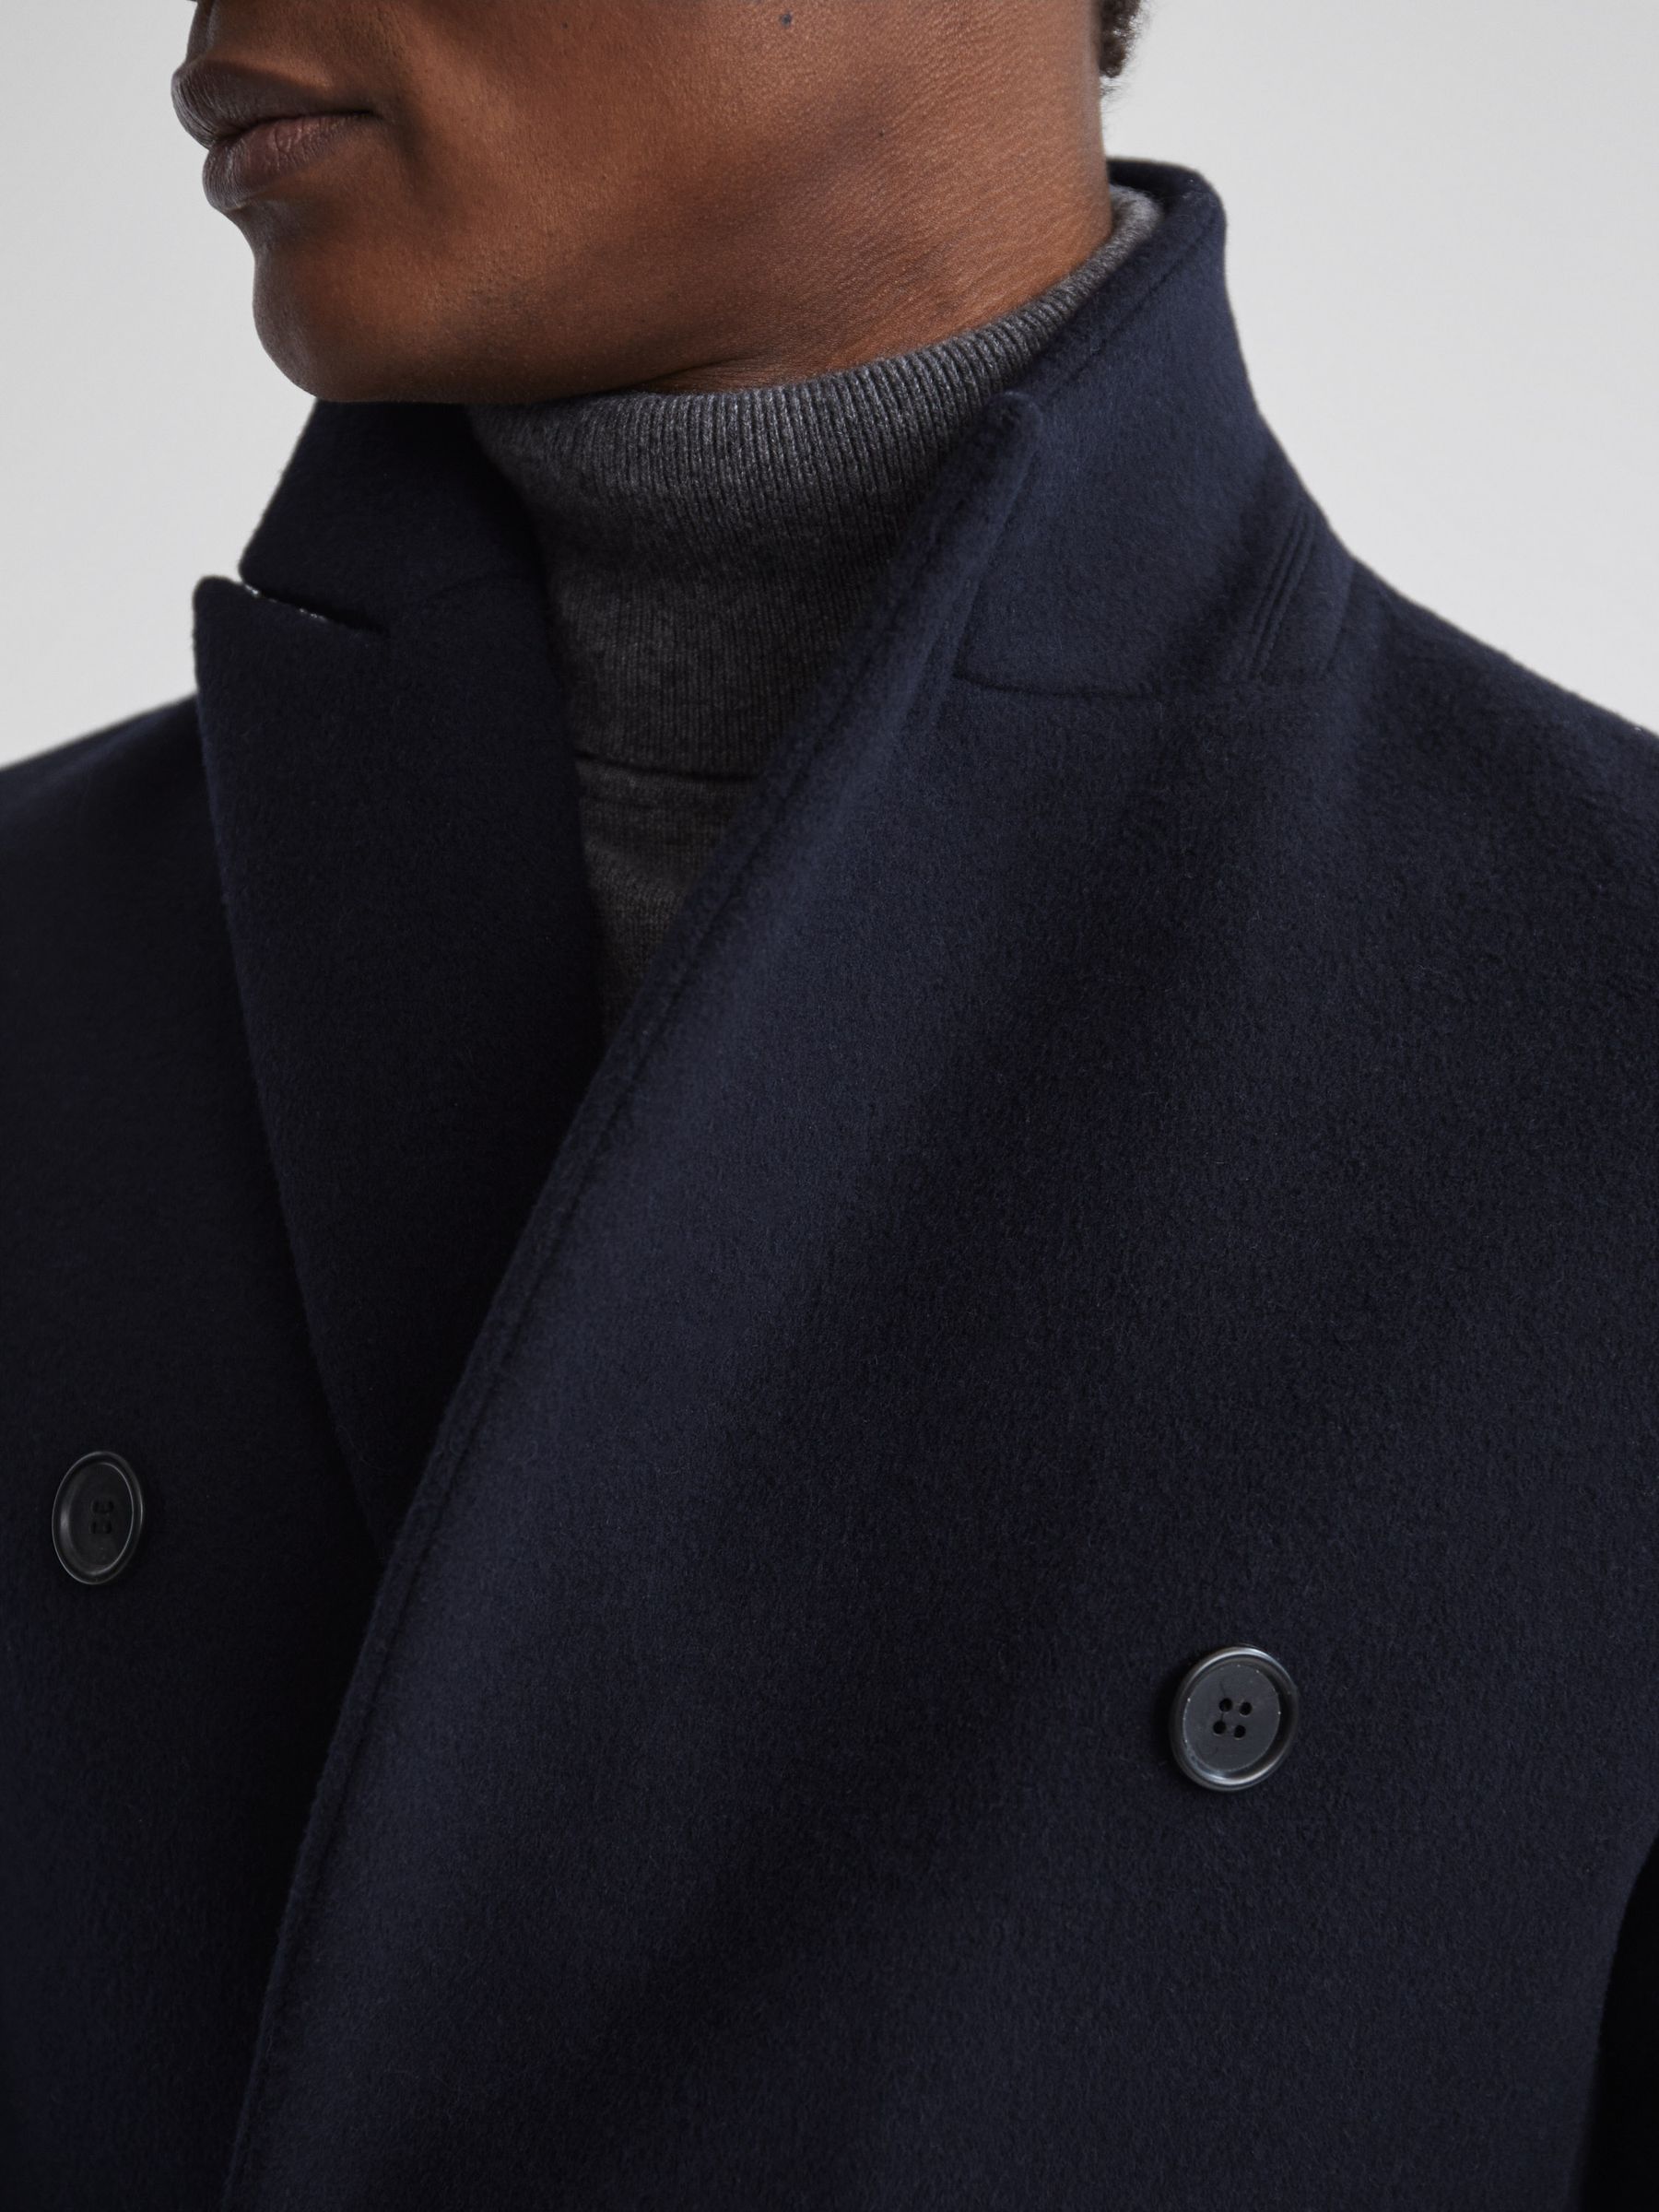 Reiss Glory Double Breasted Wool Blend Overcoat - REISS